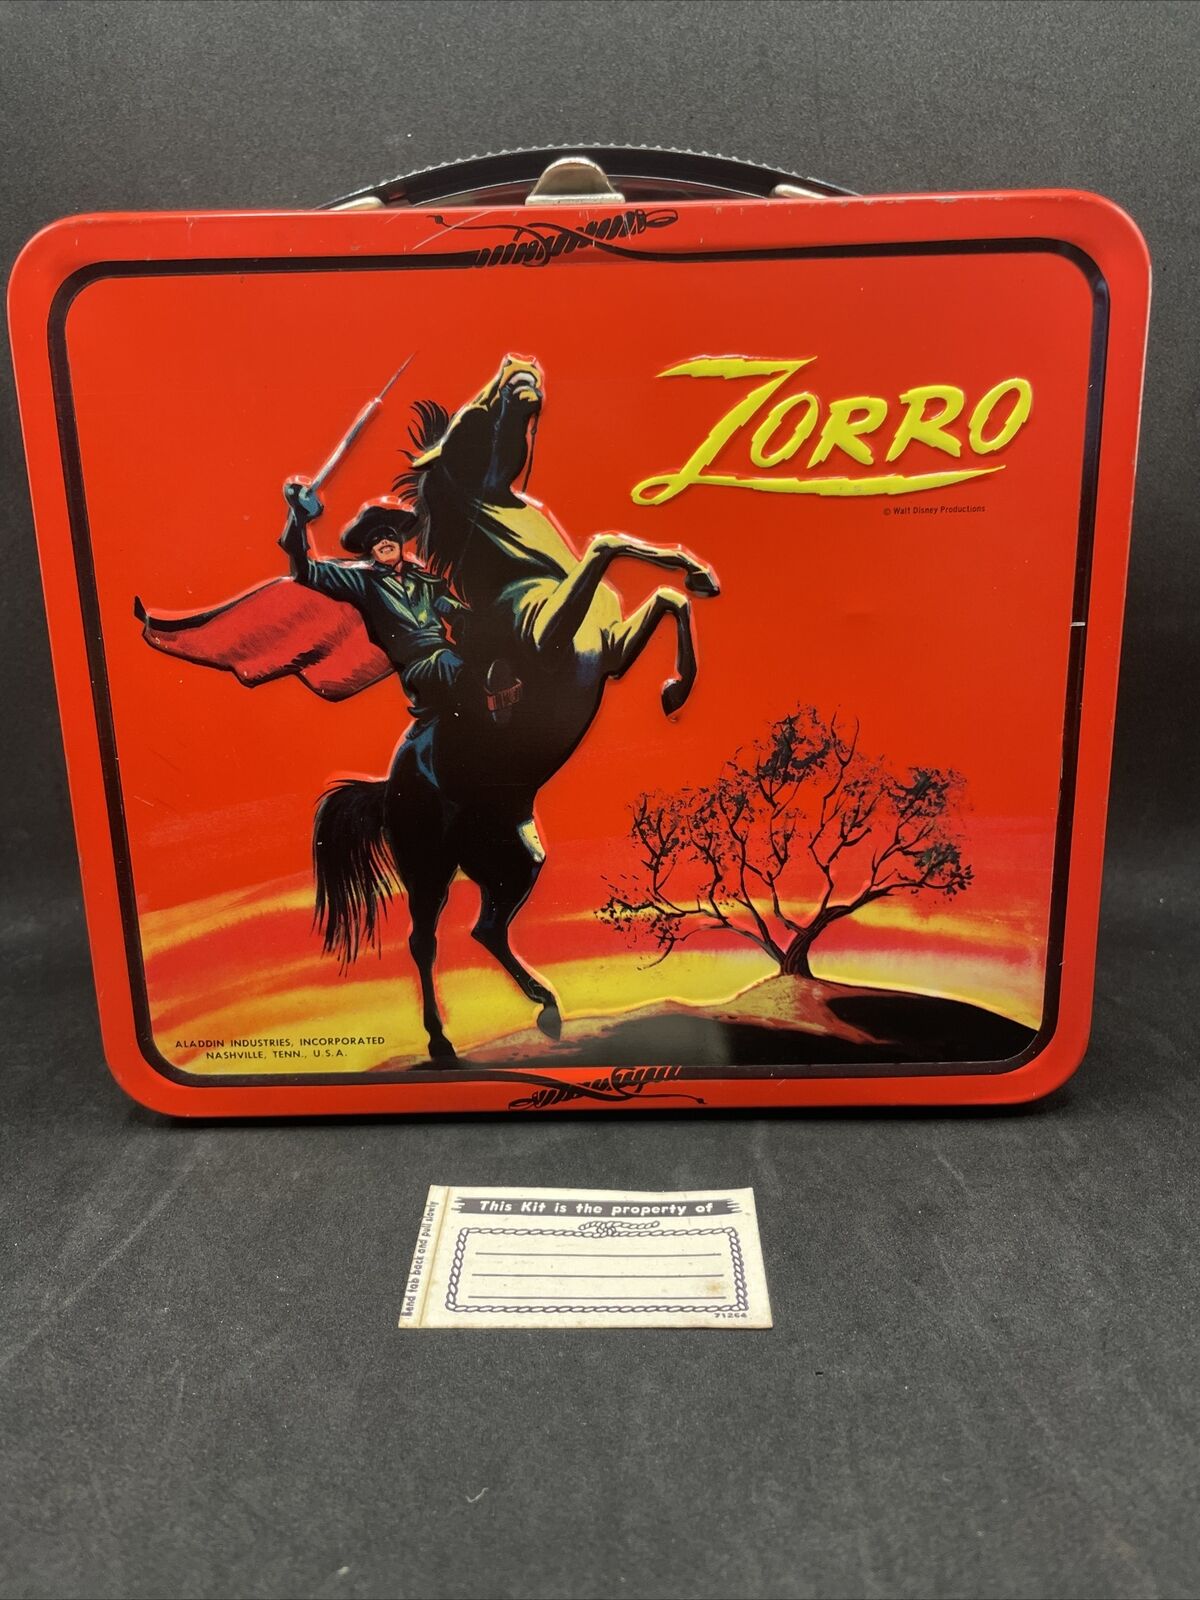 RARE 1966 RED Zorro Lunchbox Vintage - “SD Collection” Brand New With Sticker